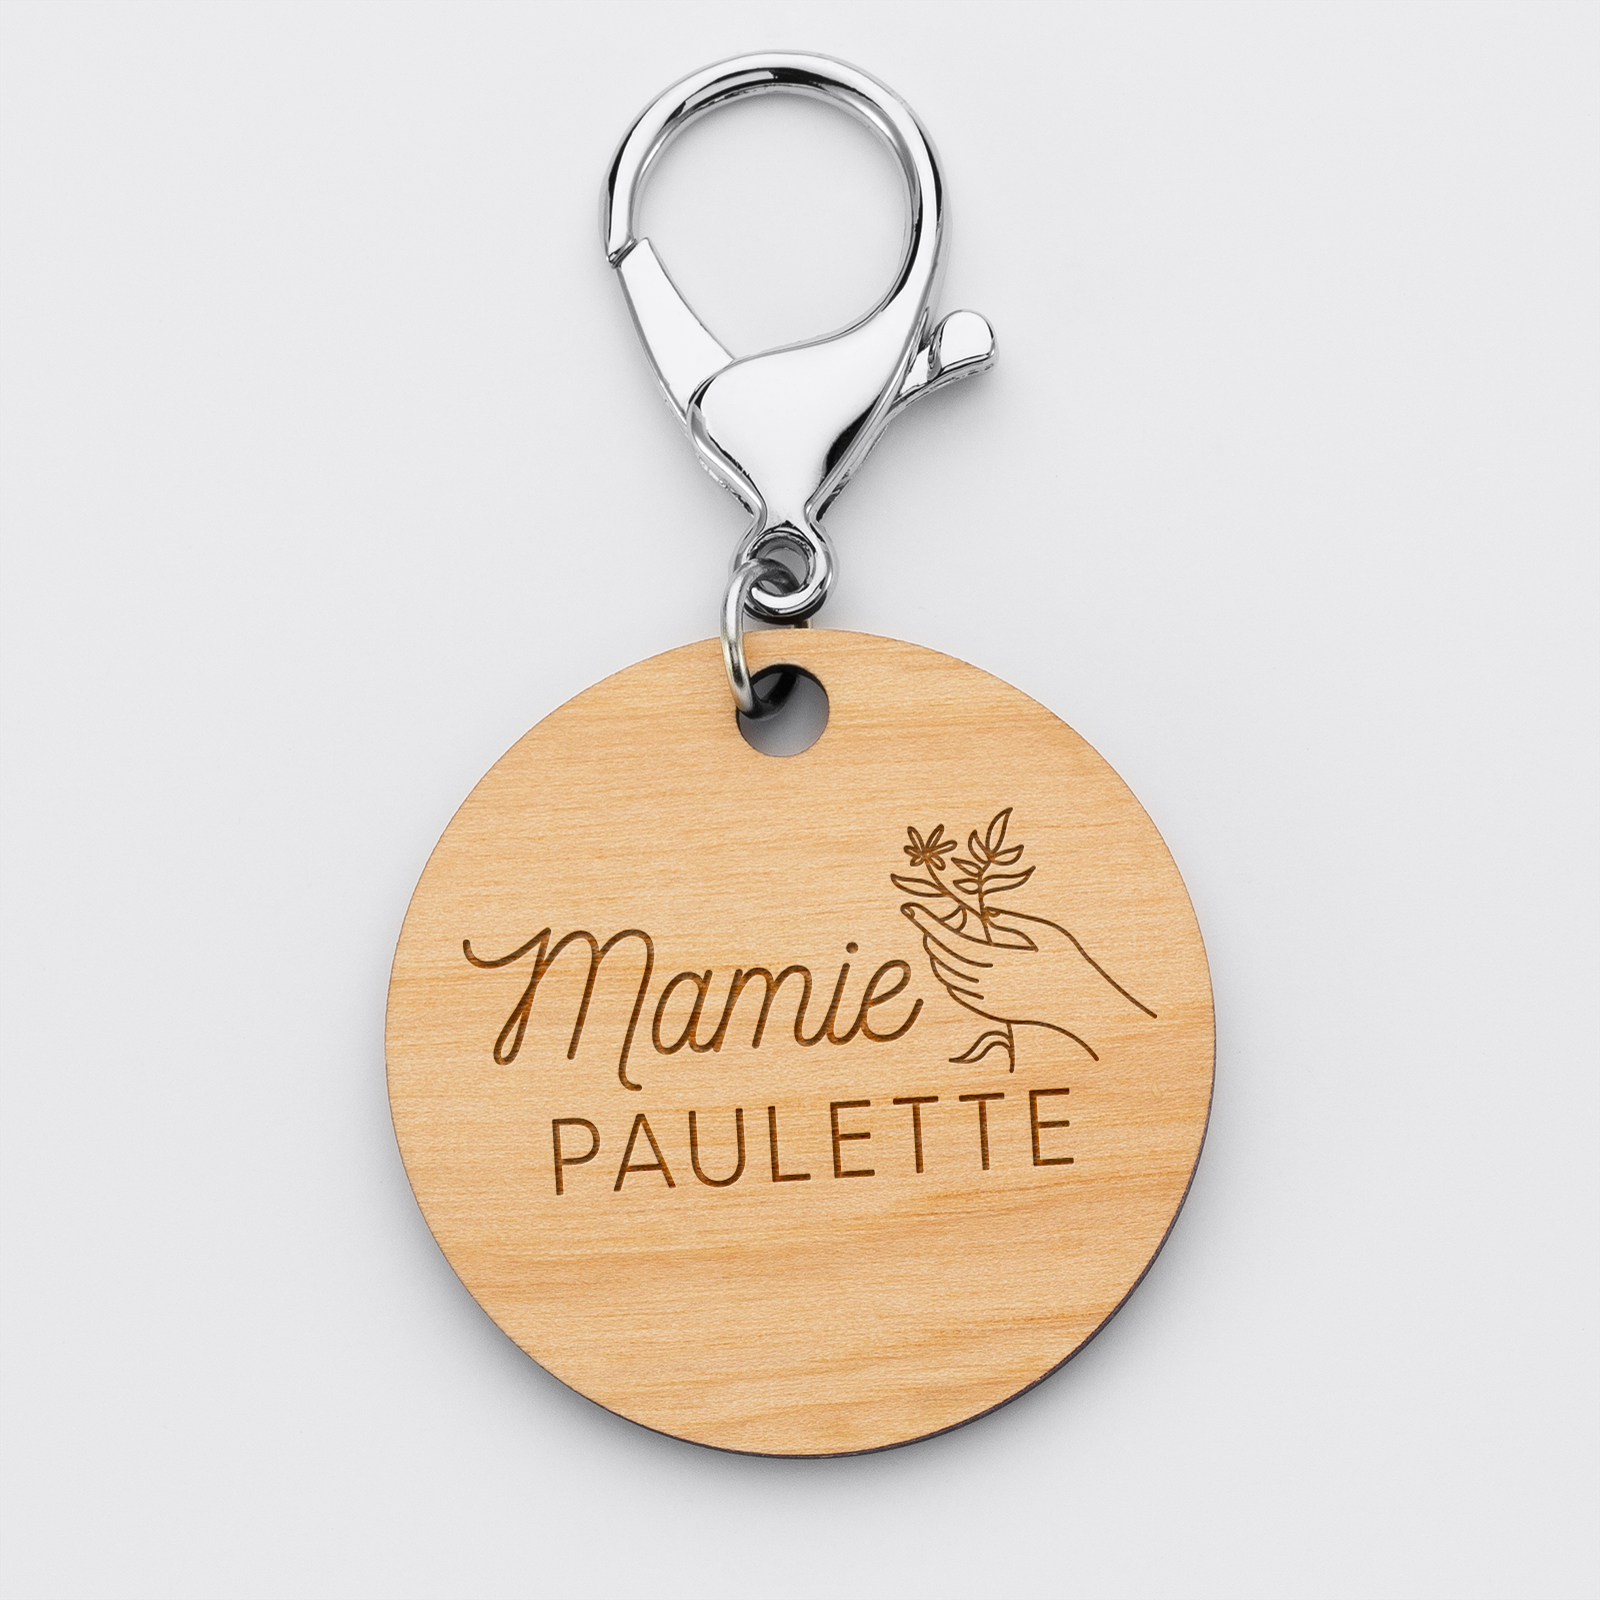 Personalised engraved wooden medallion keyring - "Granny bouquet" special edition